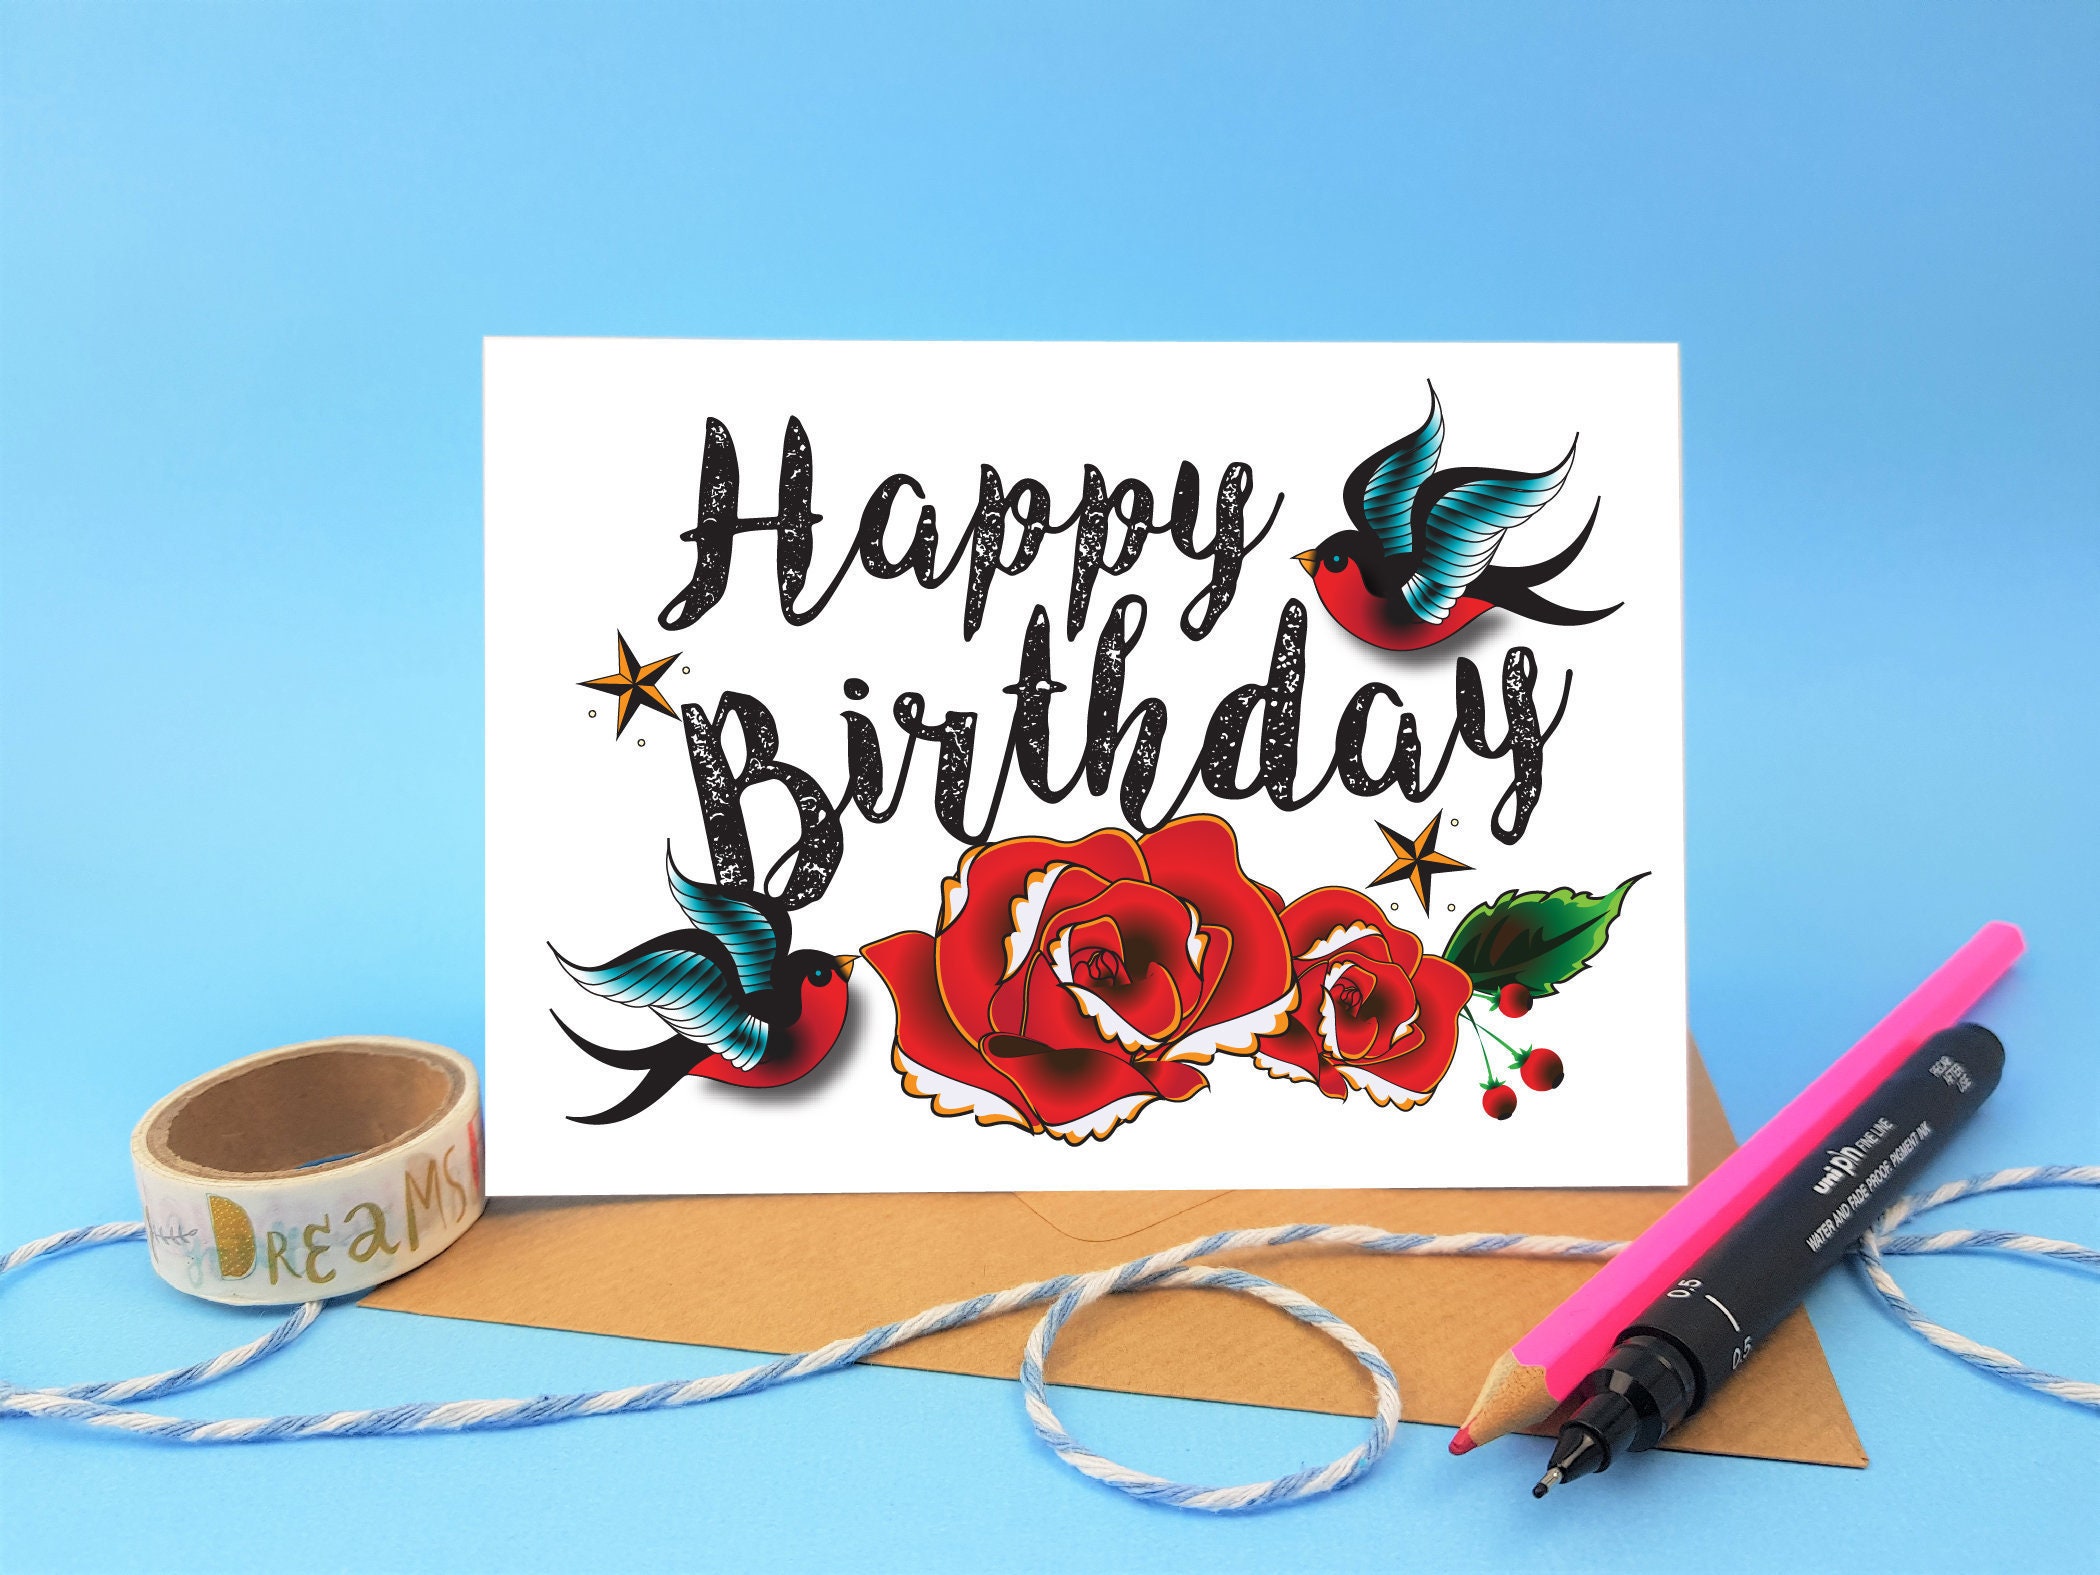 Happy birthday images with Tattoo  Free happy bday pictures and photos   BDaycardcom